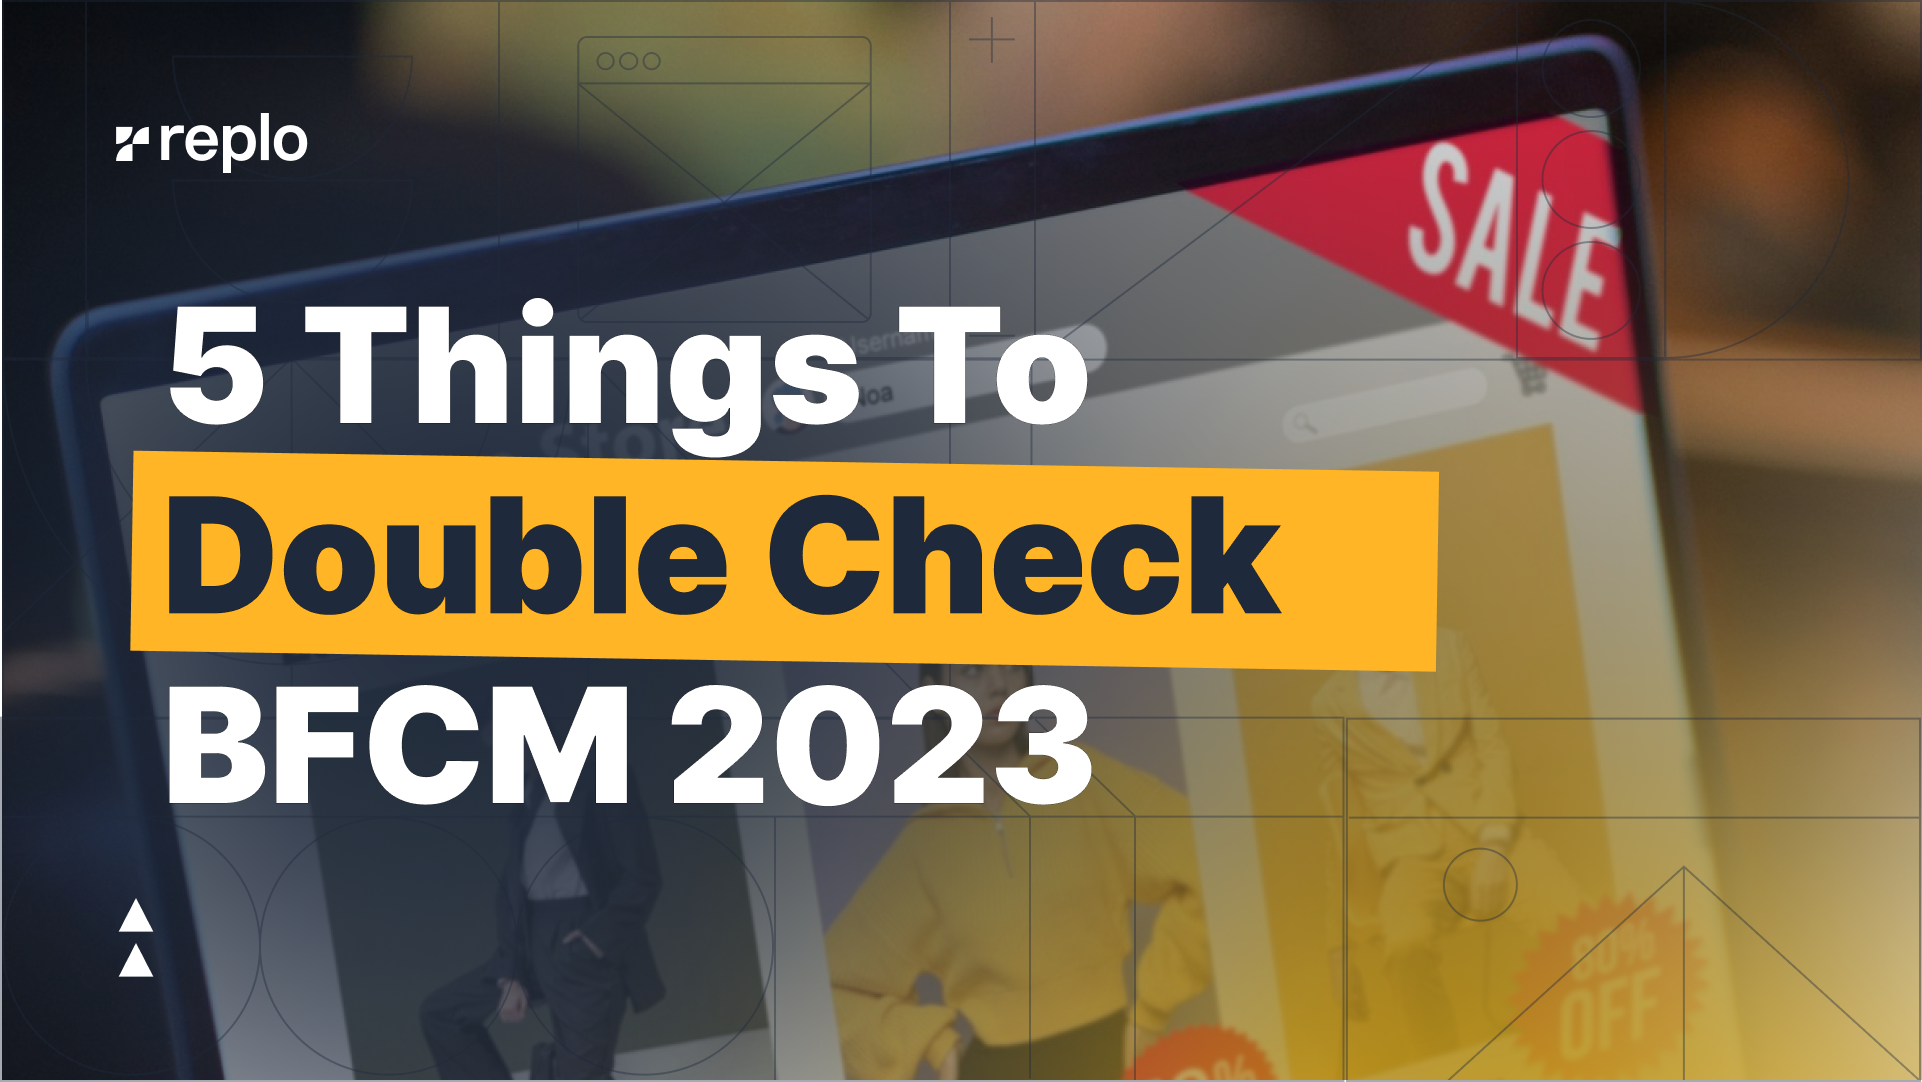 Double Check These 5 Things To Ensure 2023 Black Friday + Cyber Monday (BFCM) Is Smooth